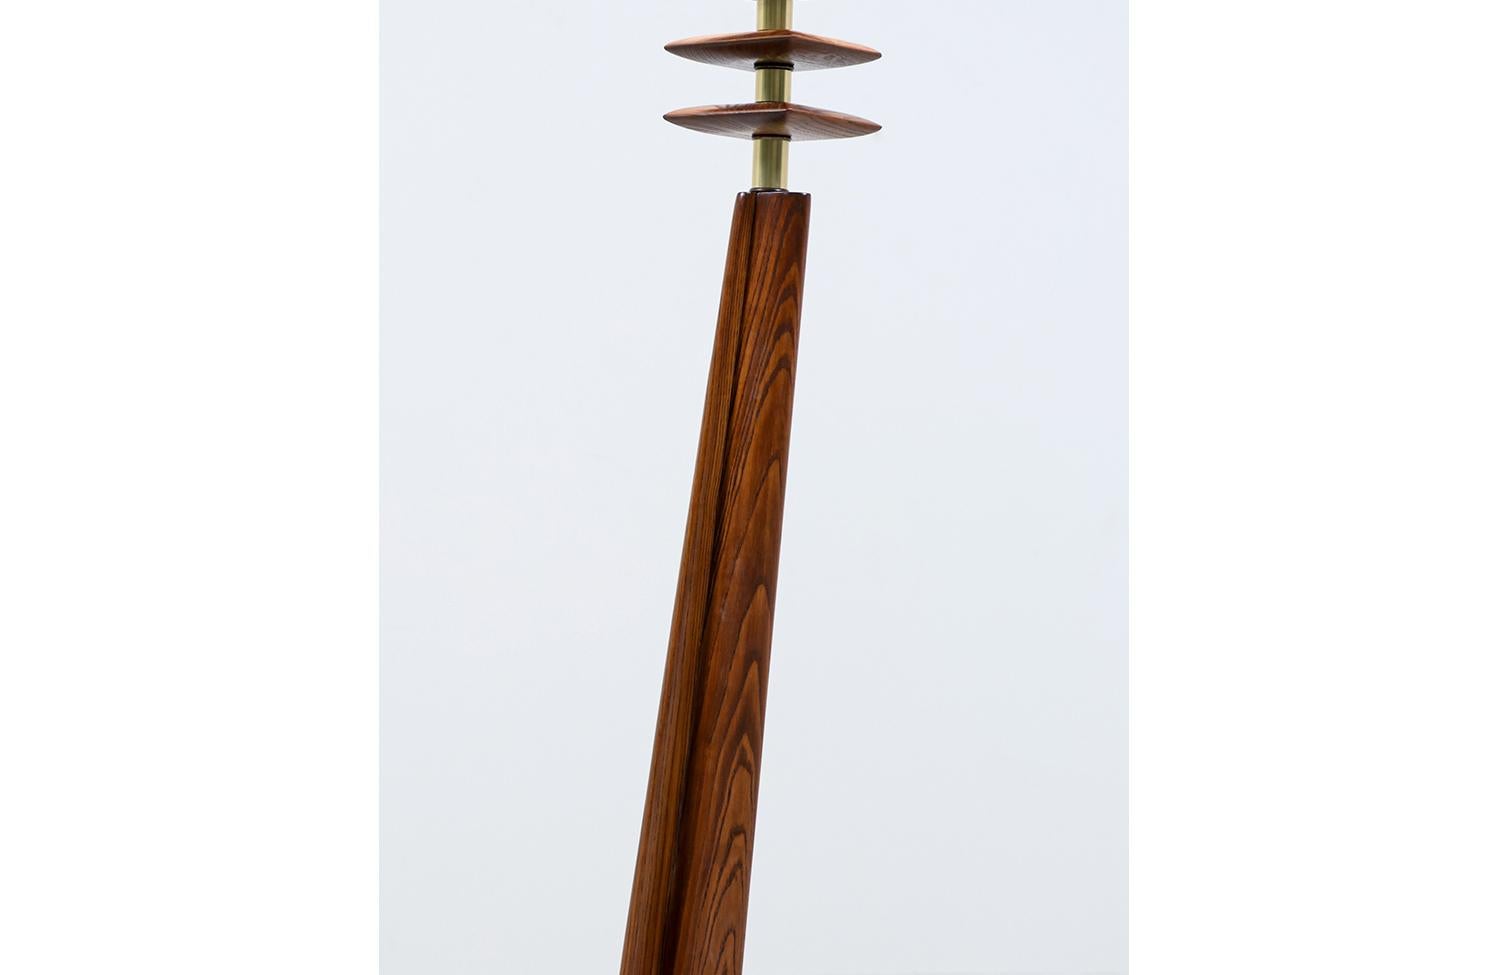  Expertly Restored - Mid-Century Modern Sculpted Floor Lamp with Brass Accents For Sale 2